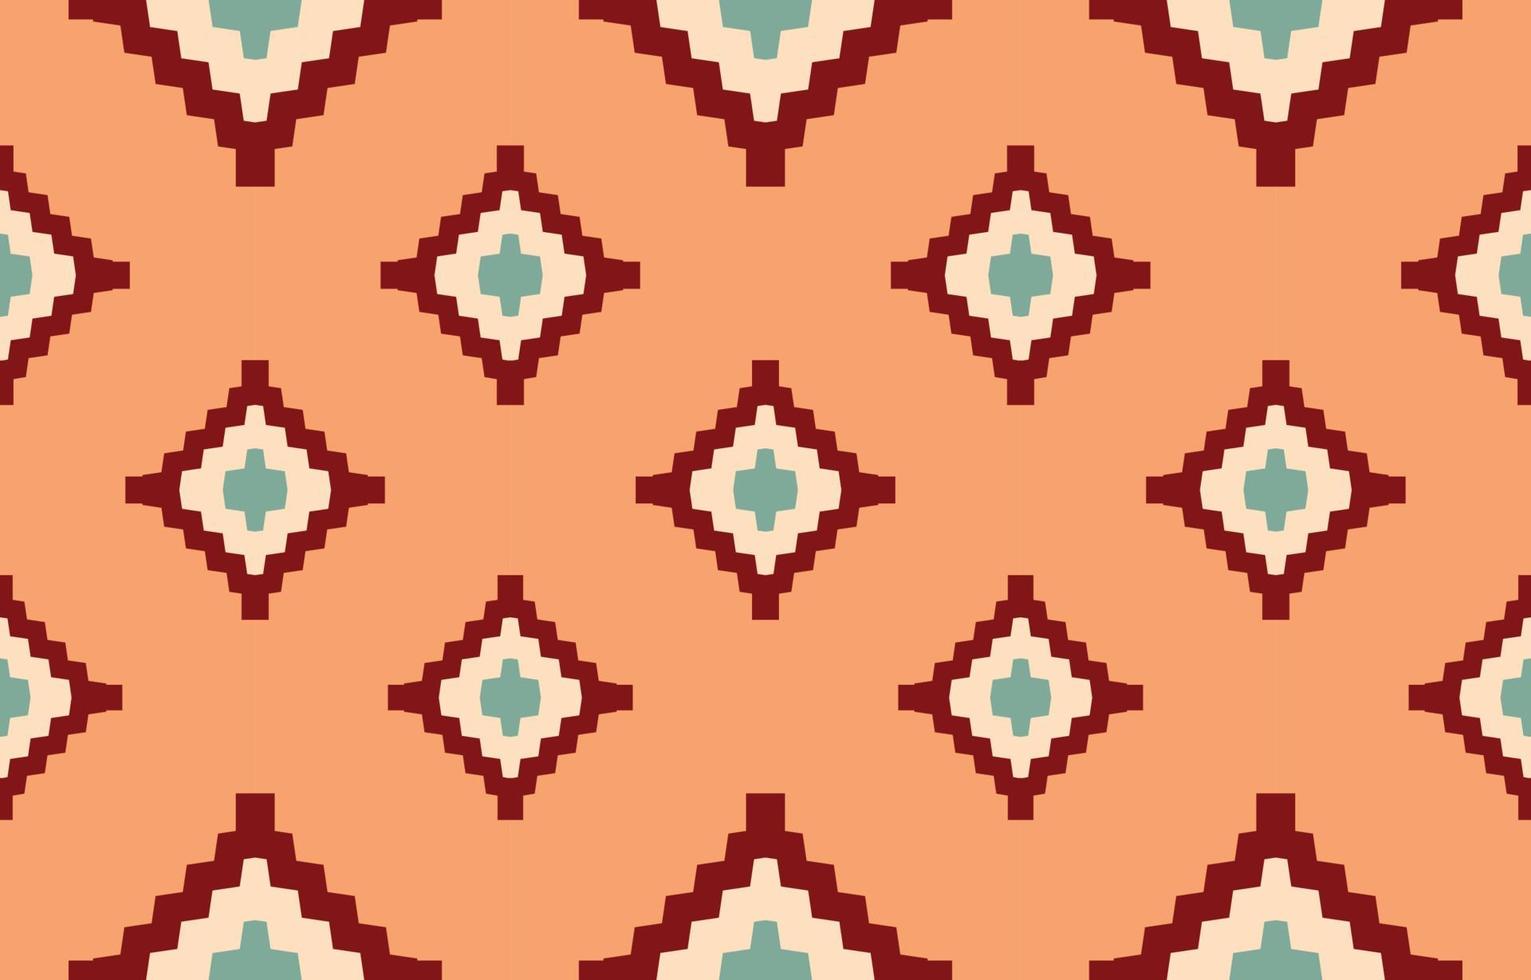 Navajo native american fabric seamless pattern,geometric tribal ethnic traditional background, design elements, design for carpet,wallpaper,clothing,rug,interior,embroidery vector illustration.